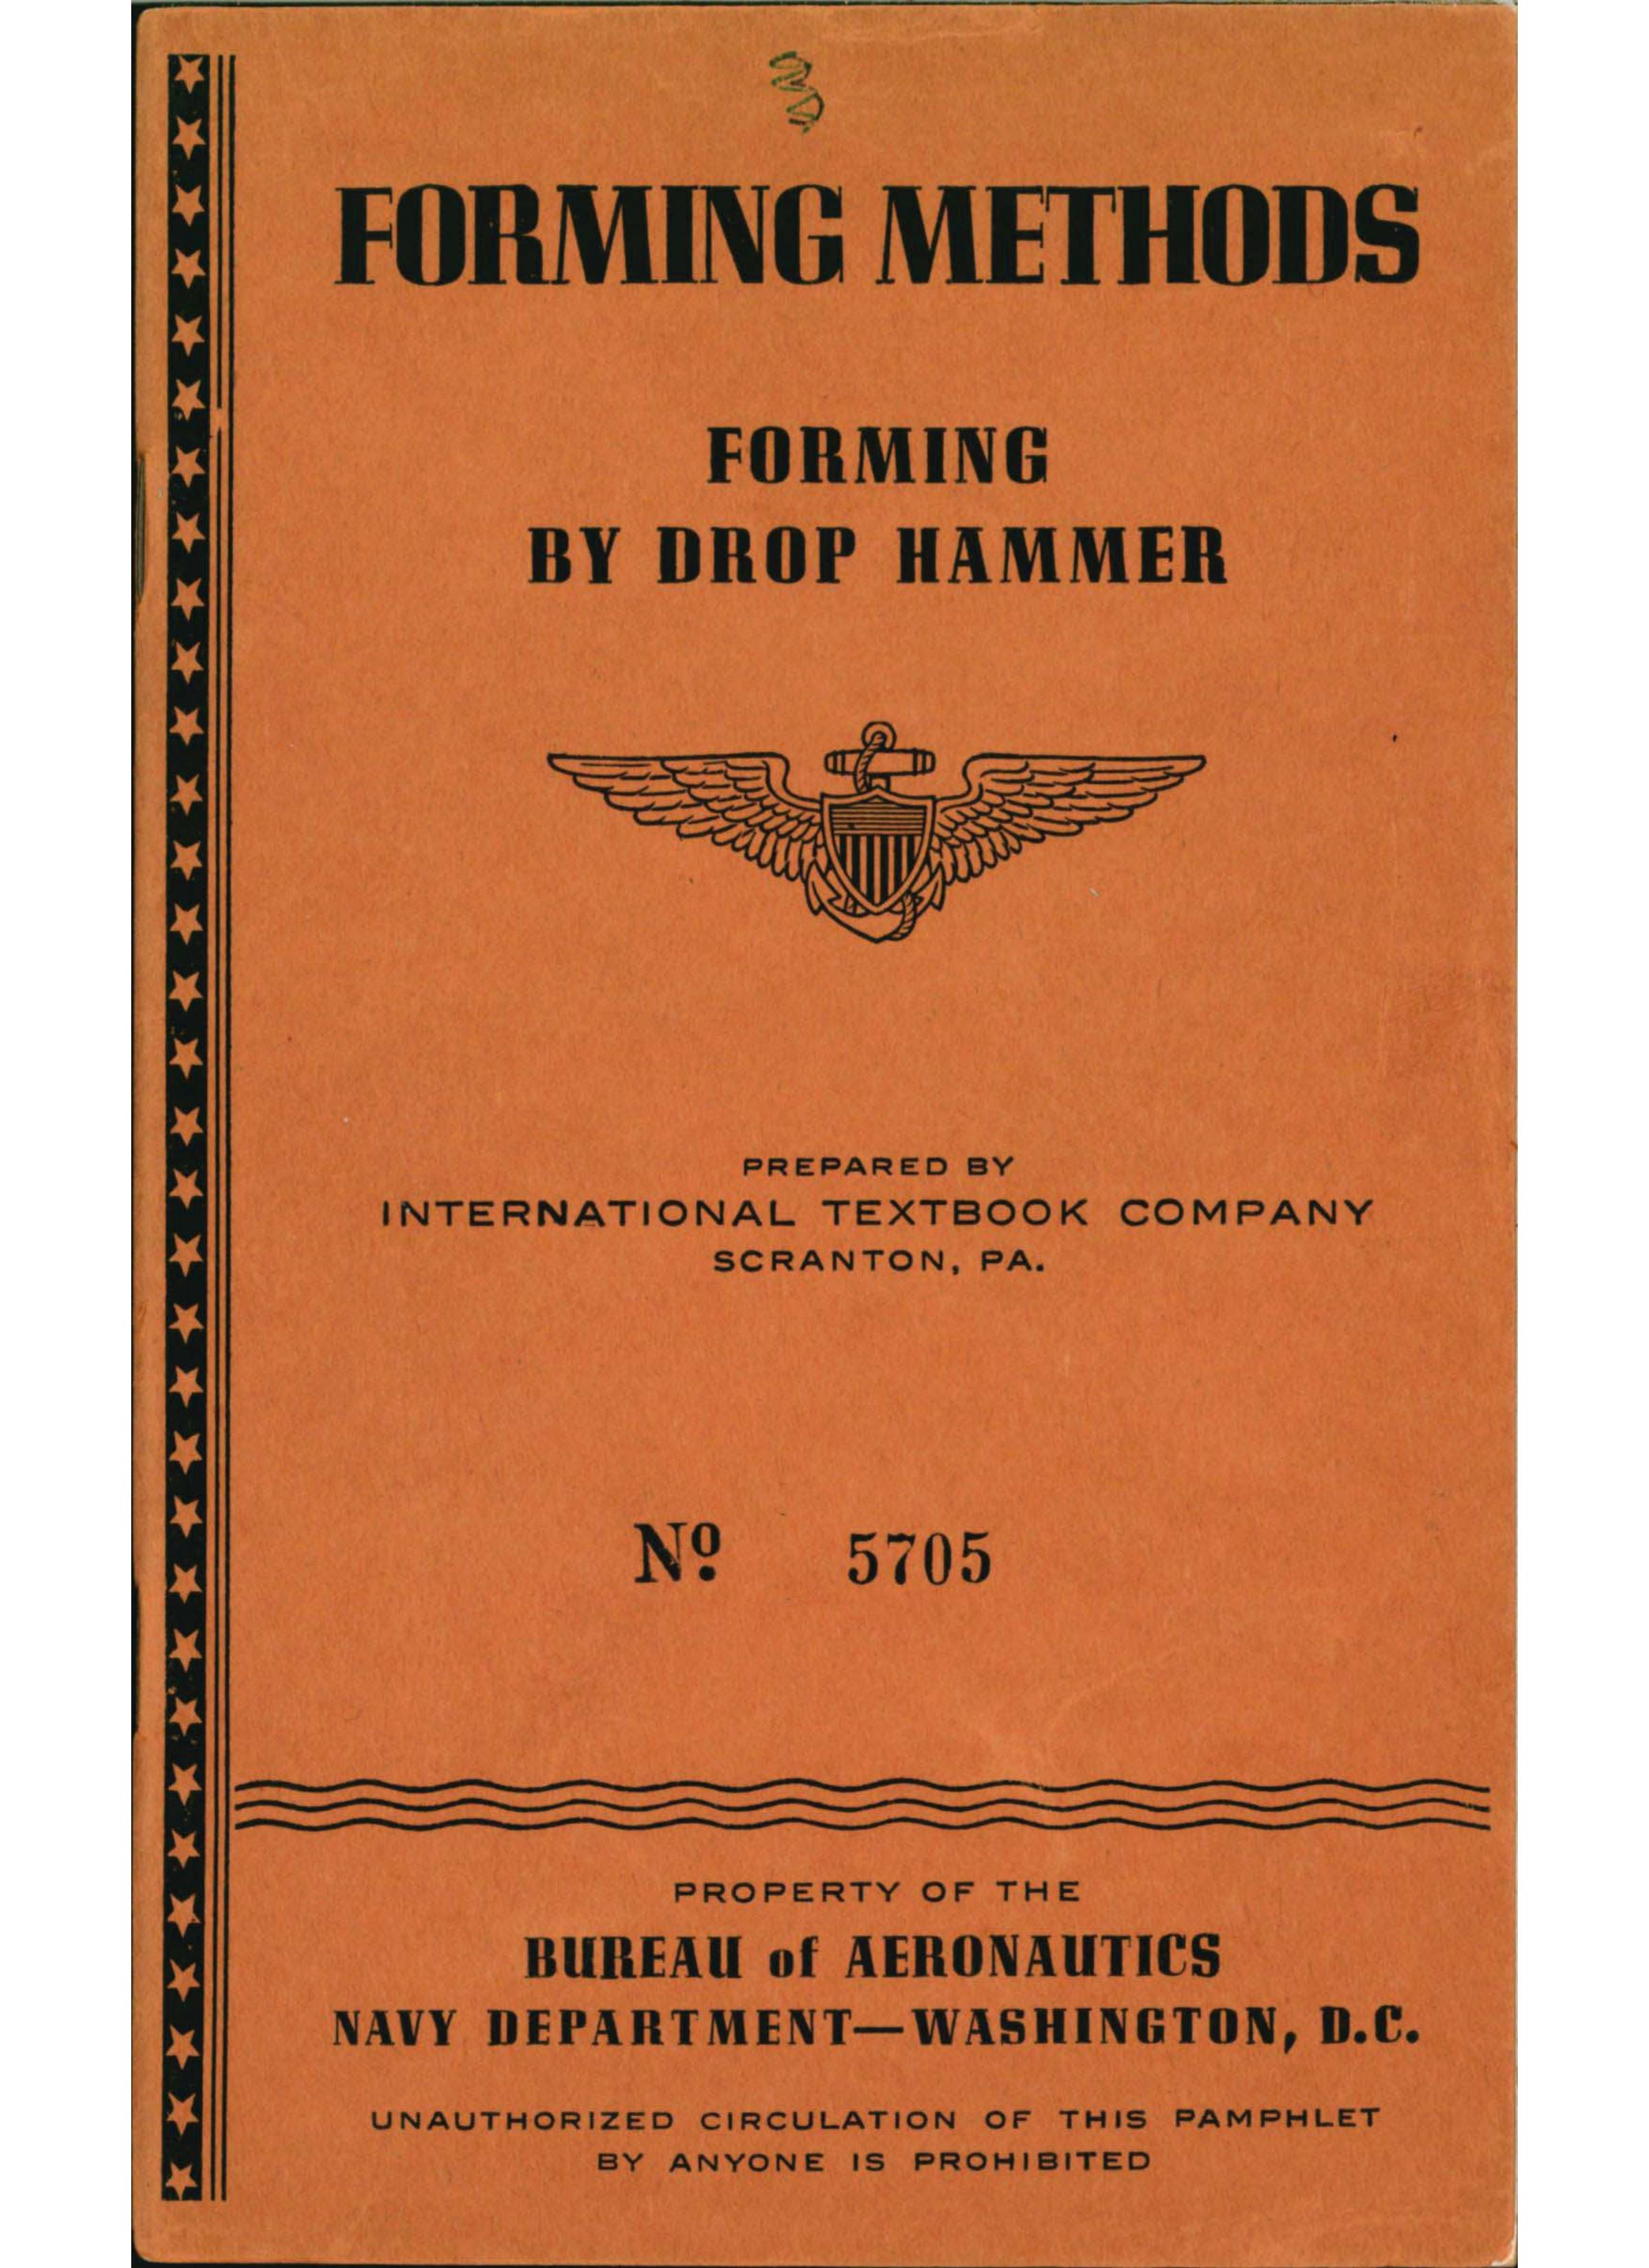 Sample page 1 from AirCorps Library document: Forming Methods - Drop Hammer - Bureau of Aeronautics